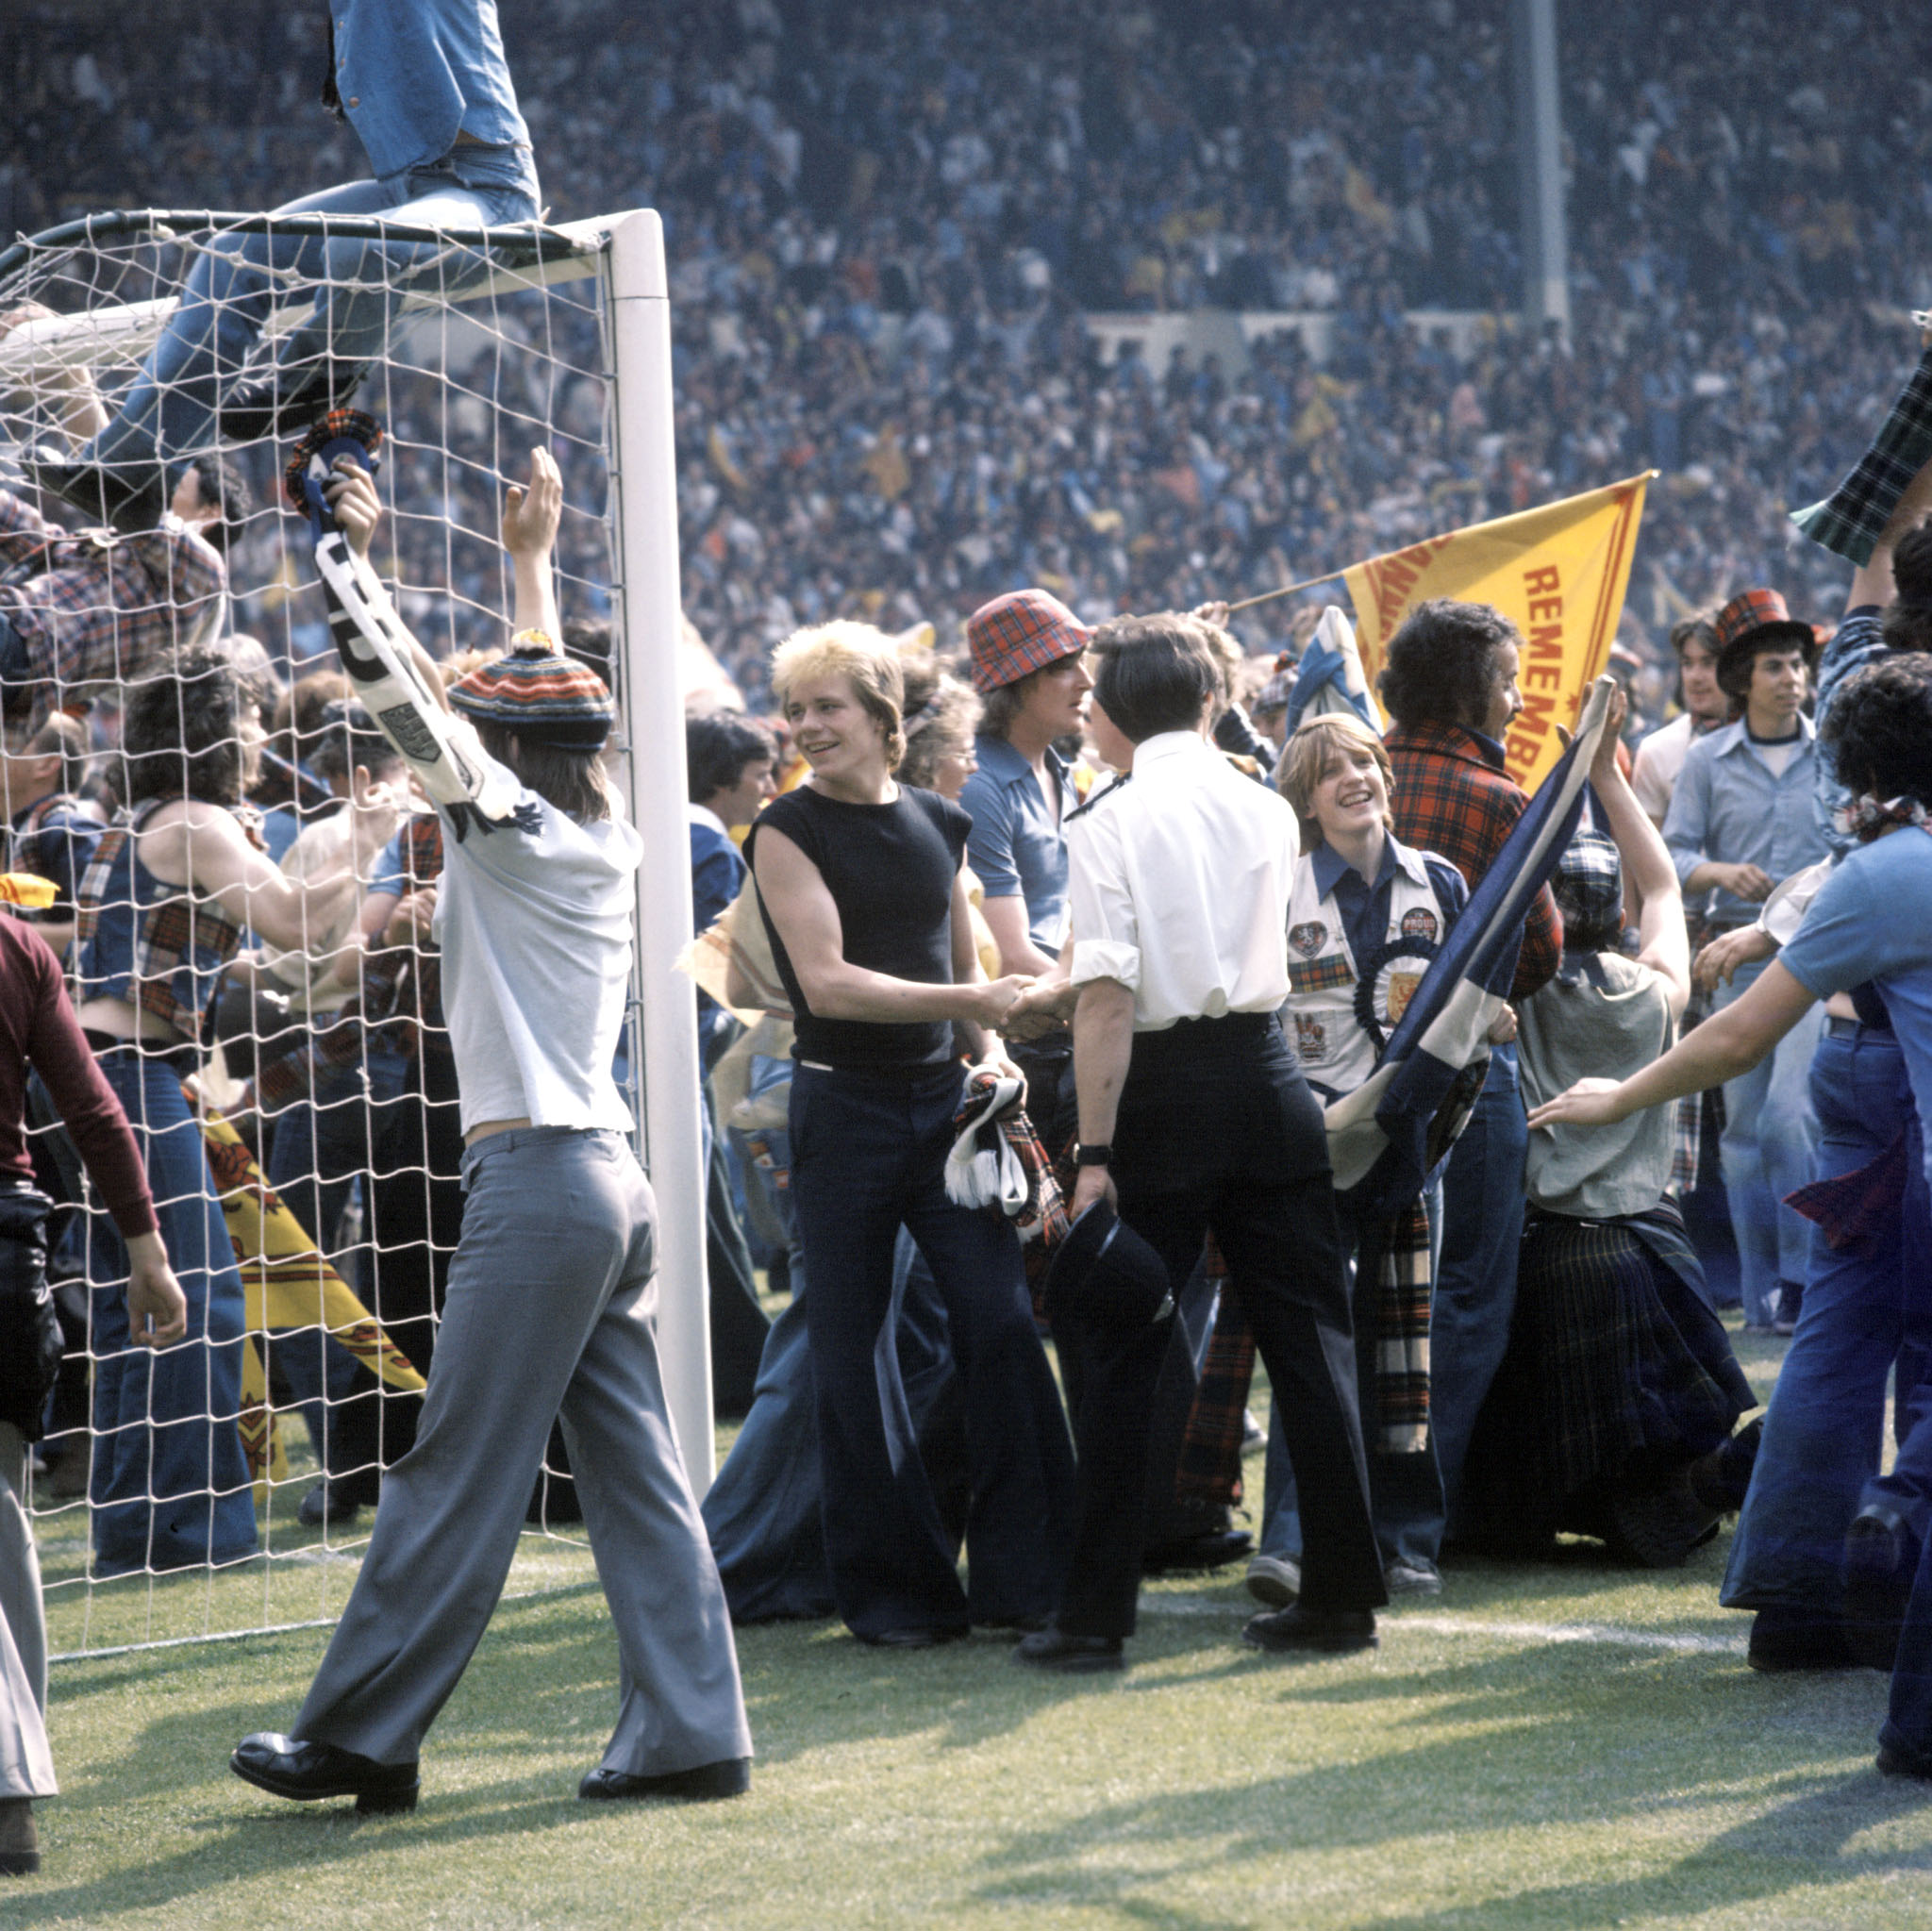 Scotland fans celebrate on the pitch after victory at Wembley in 1977.